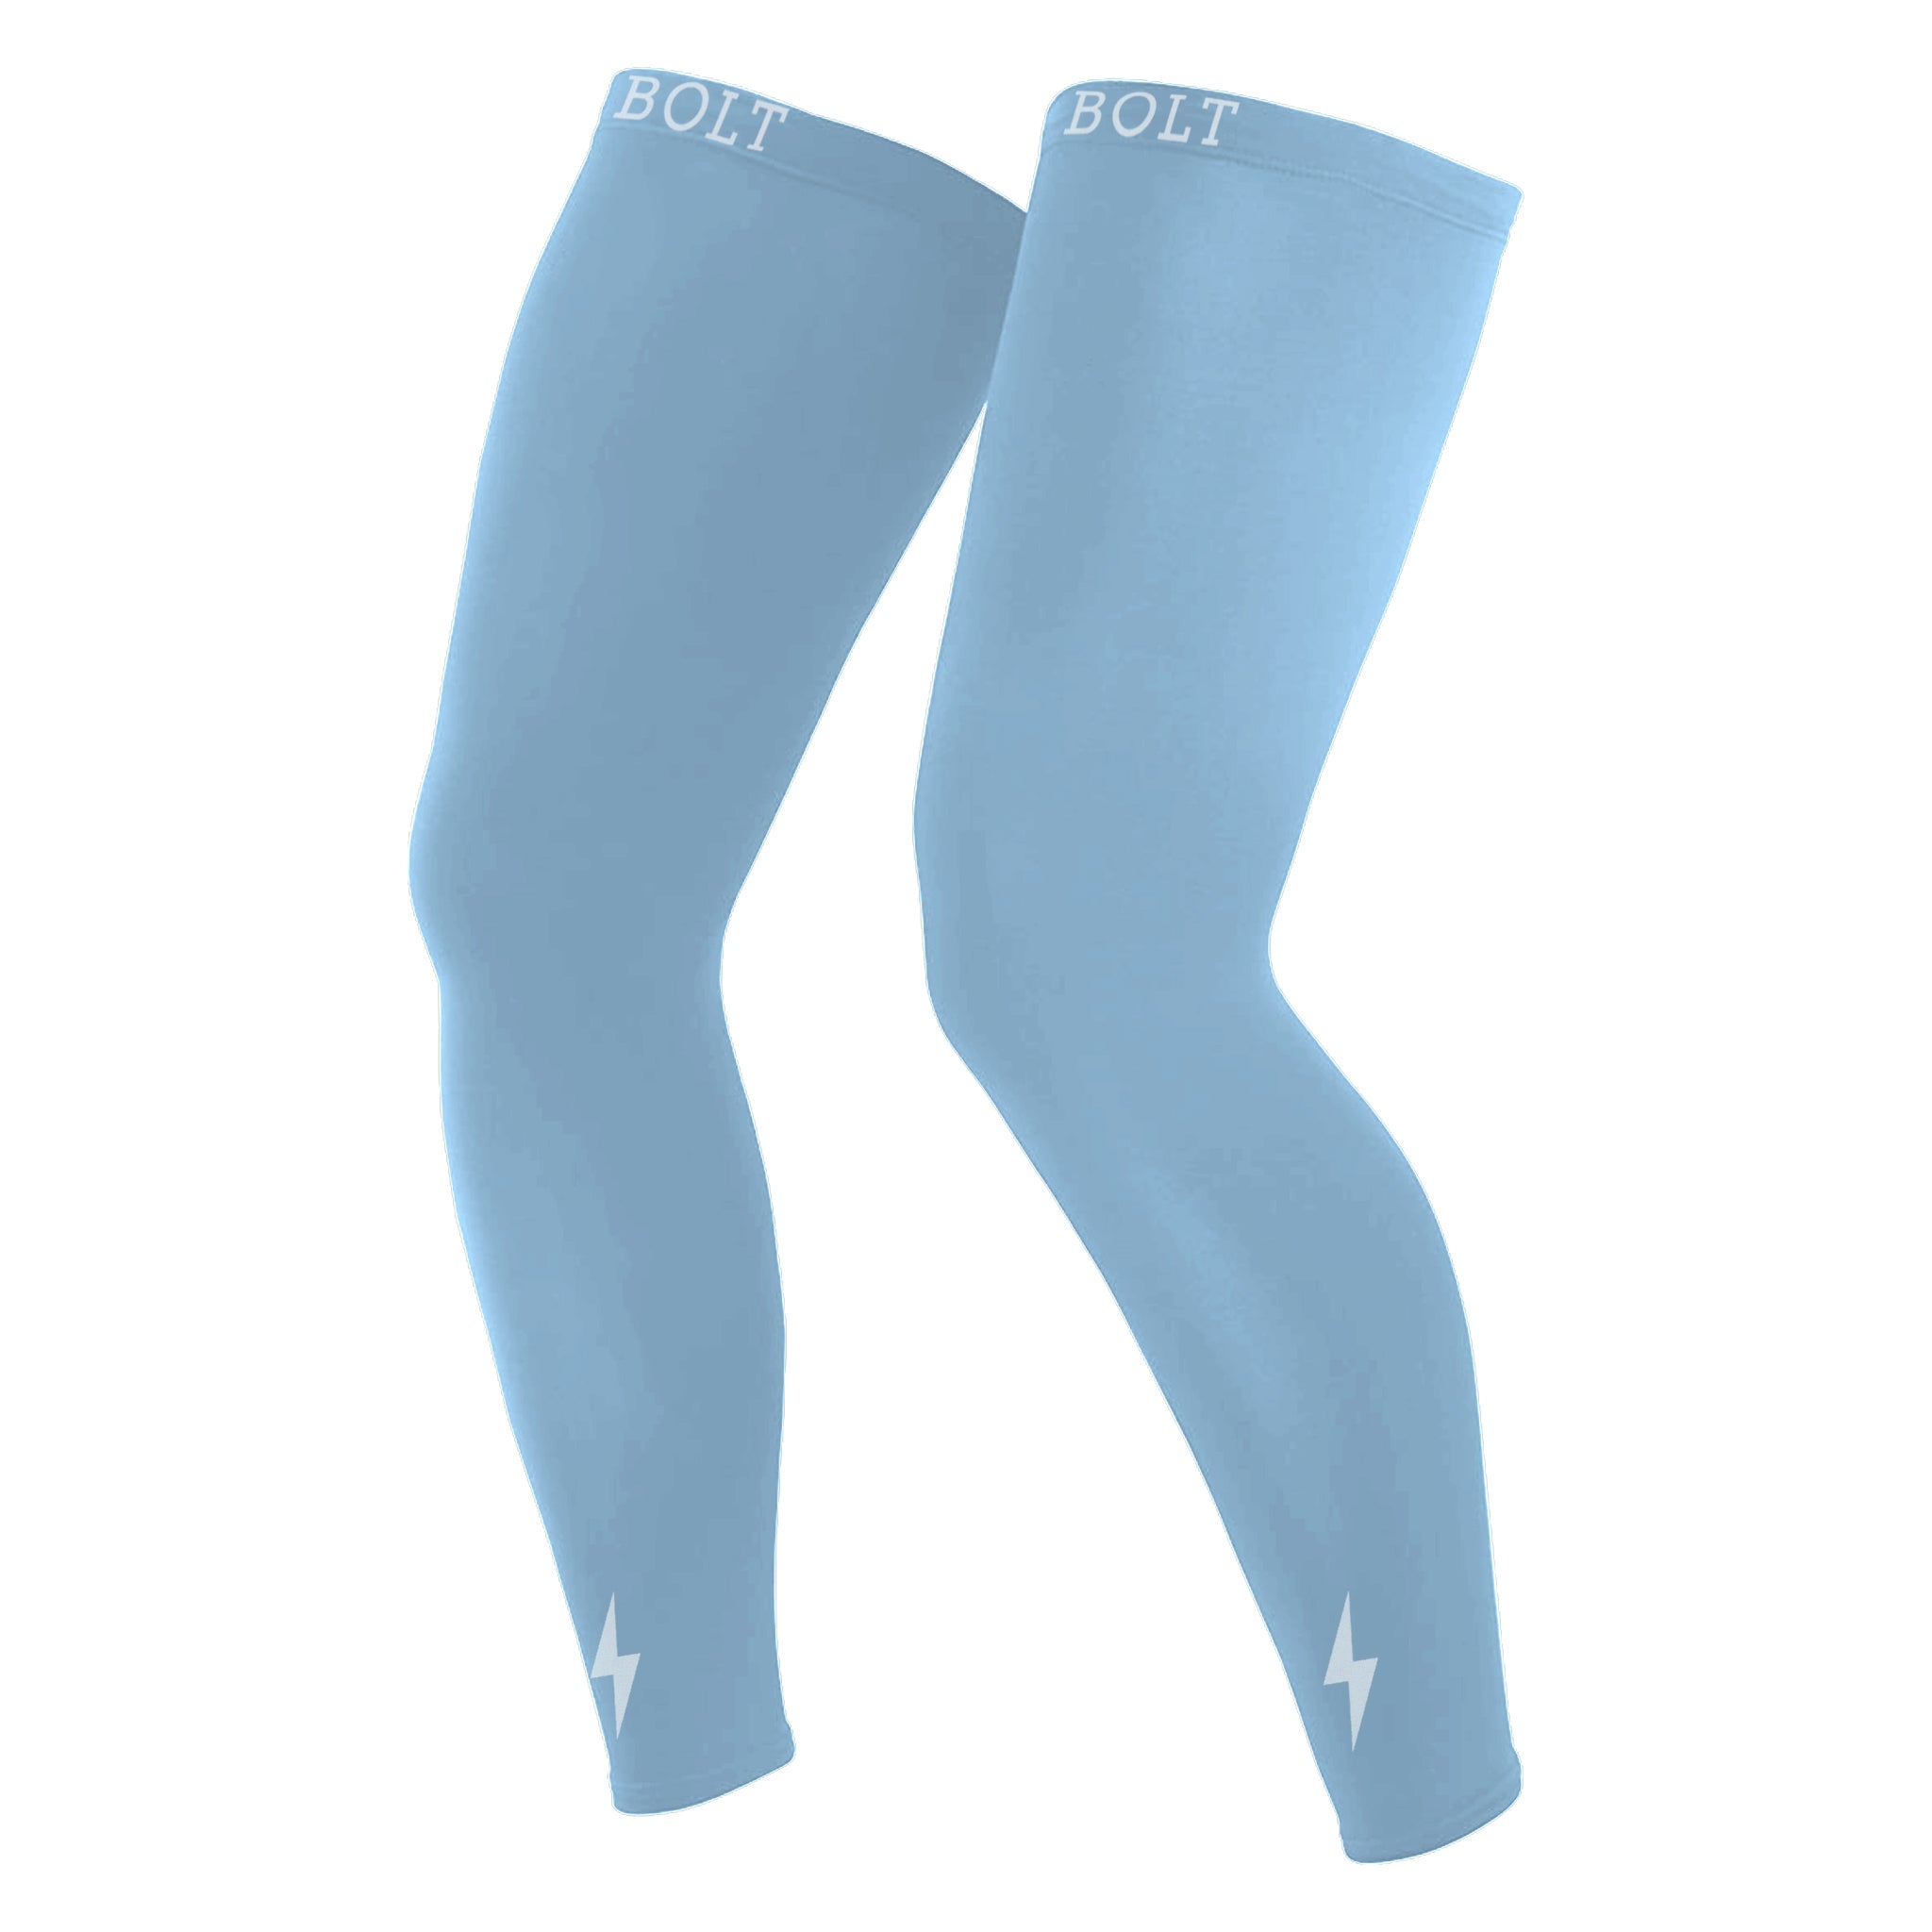 BRUCE BOLT Xtra Long Compression Leg Sleeves (pair) - BABY BLUE